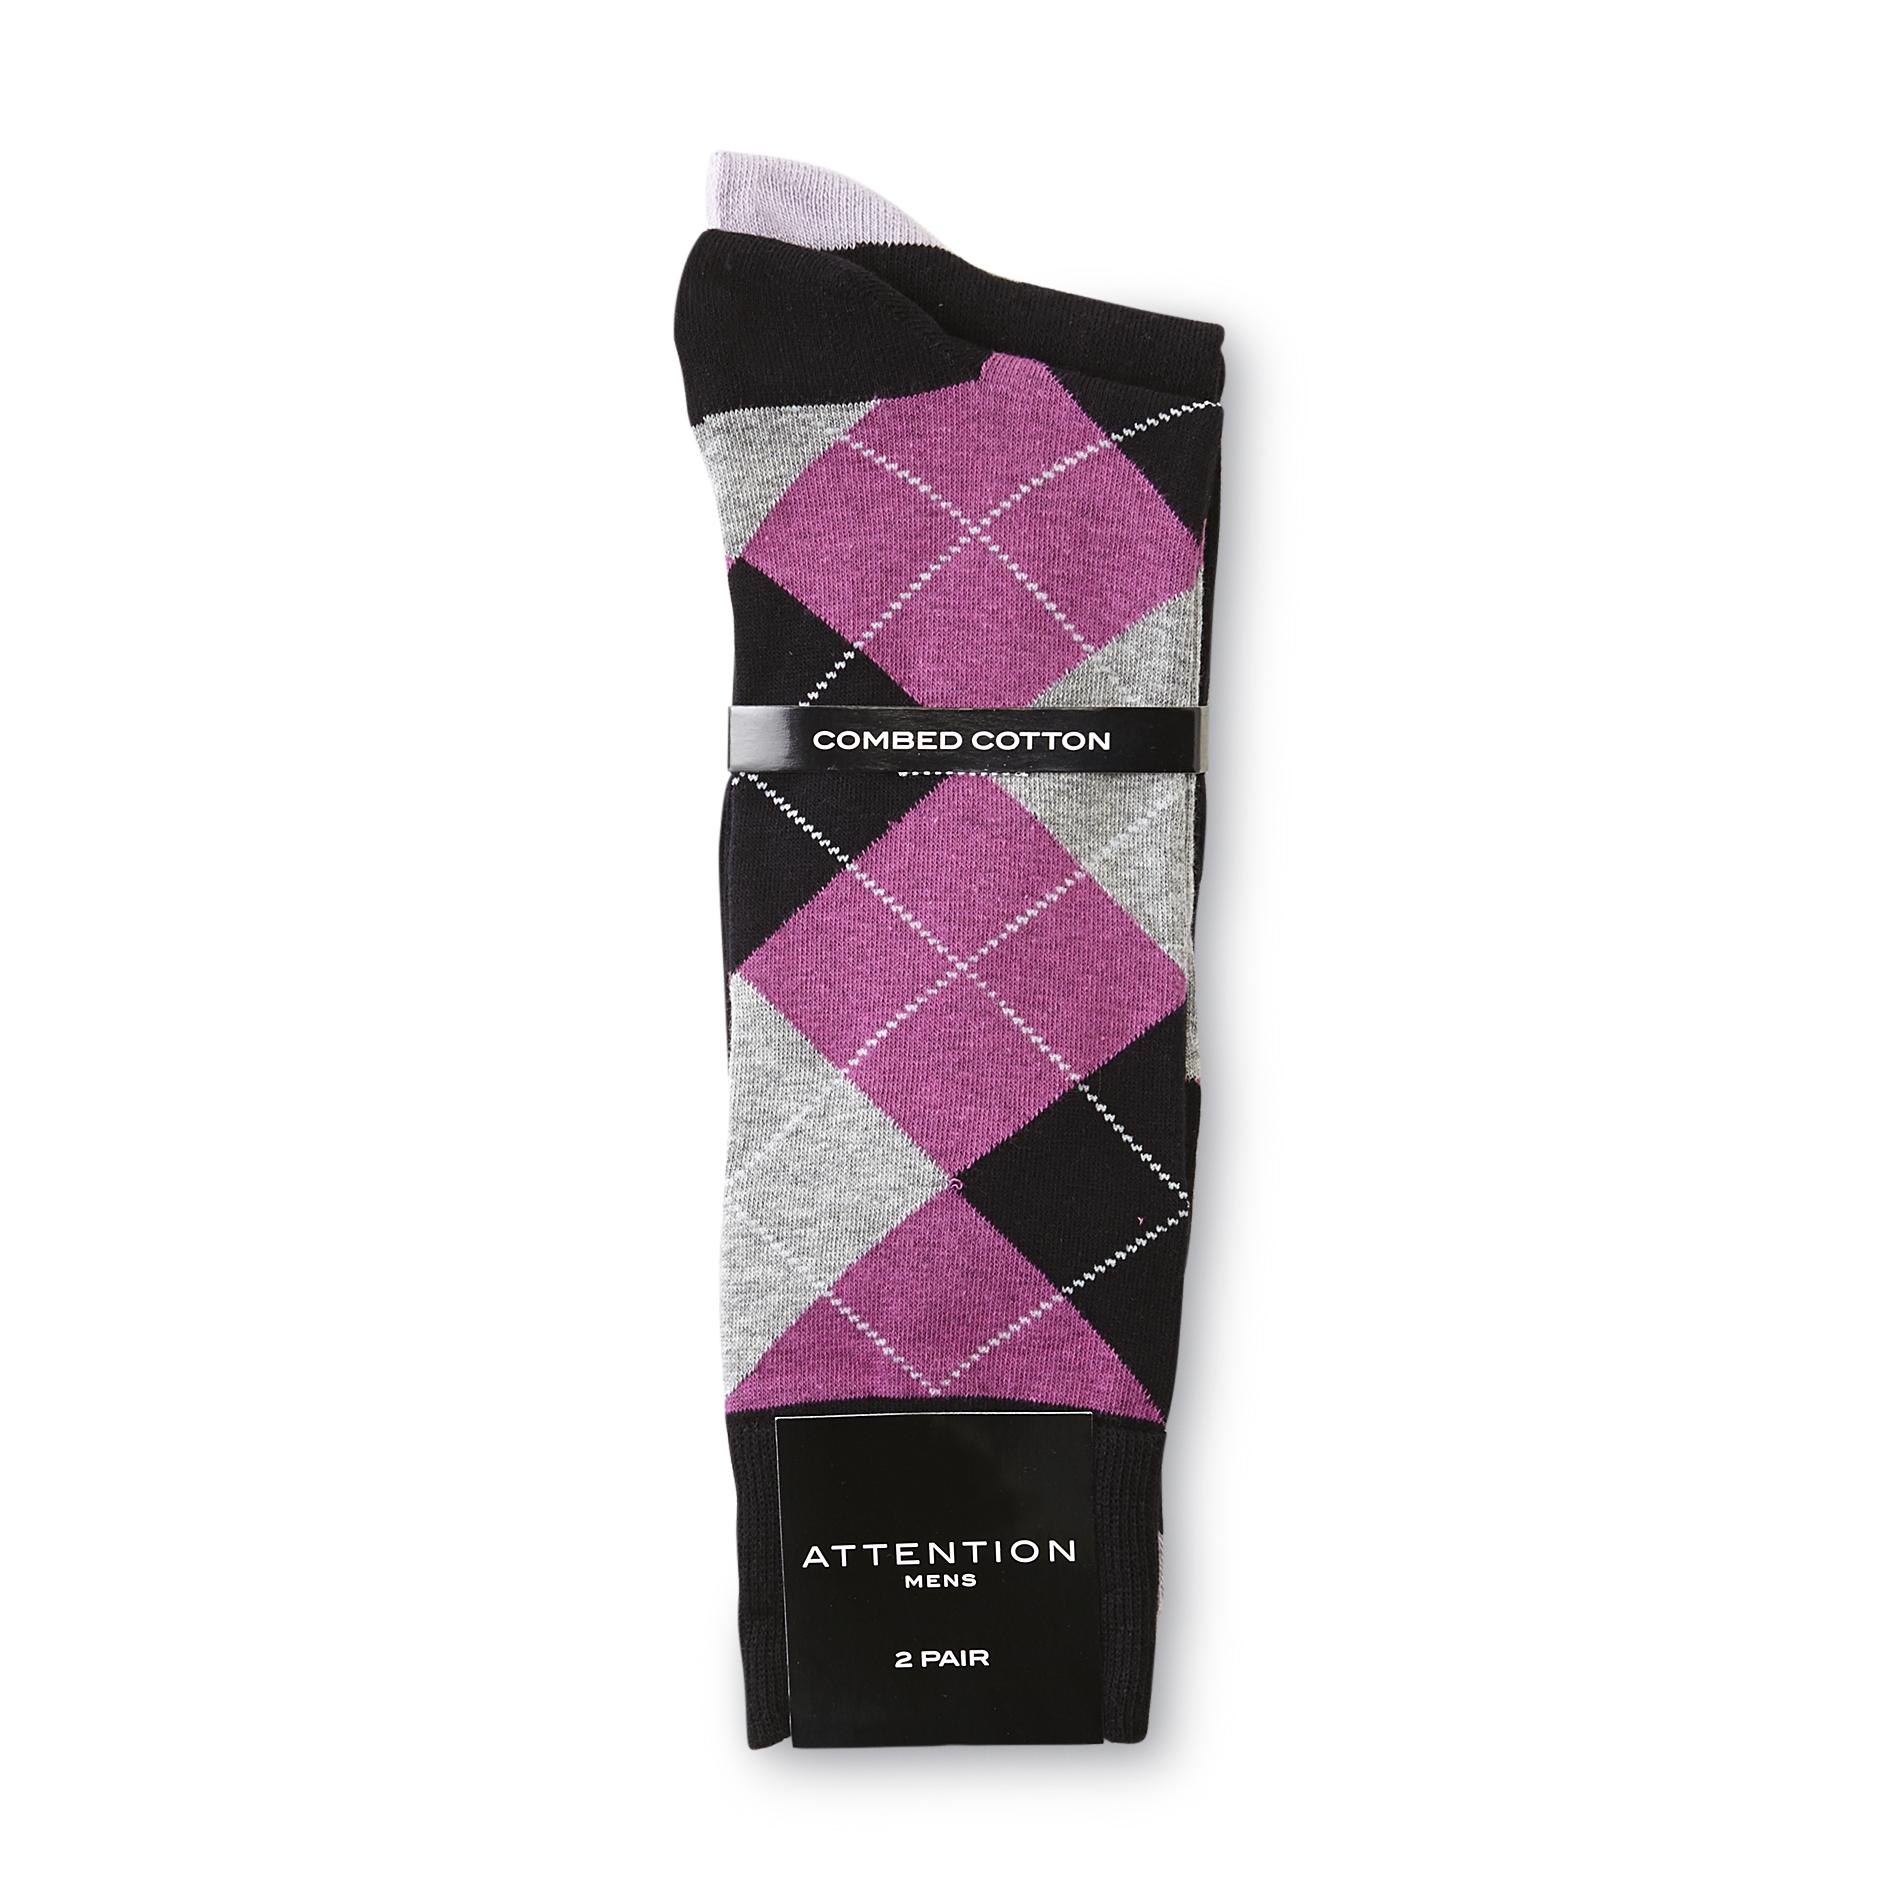 Attention Men's 2-Pairs Combed Cotton Socks - Argyle/Solid